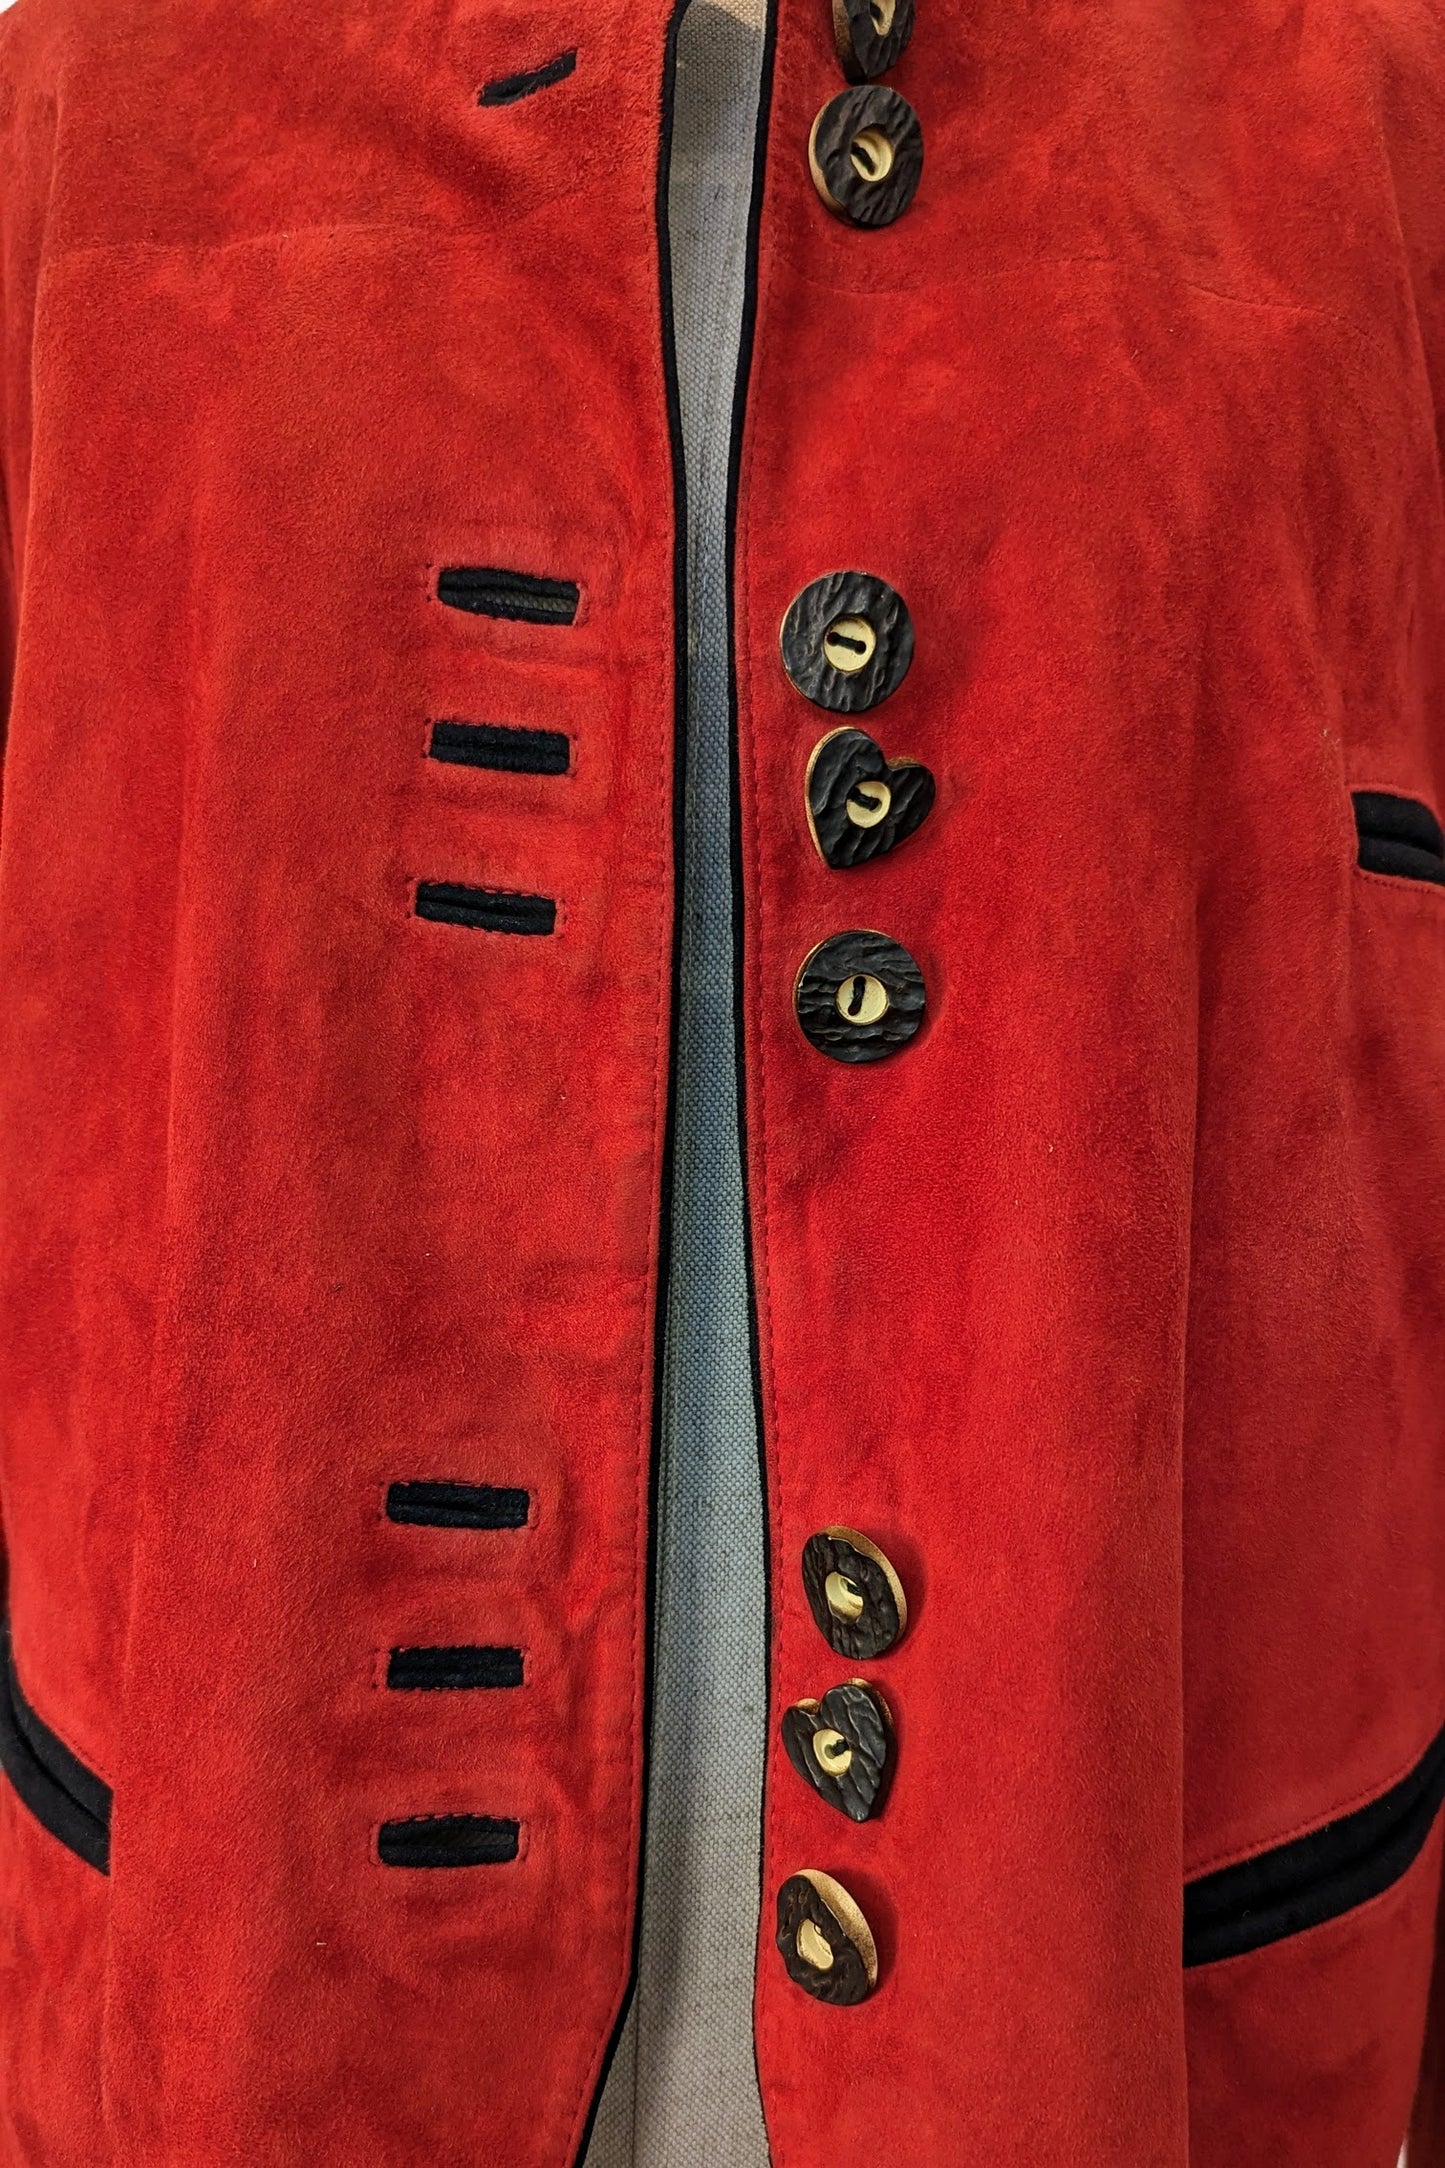 feature heart buttons on red suede jacket